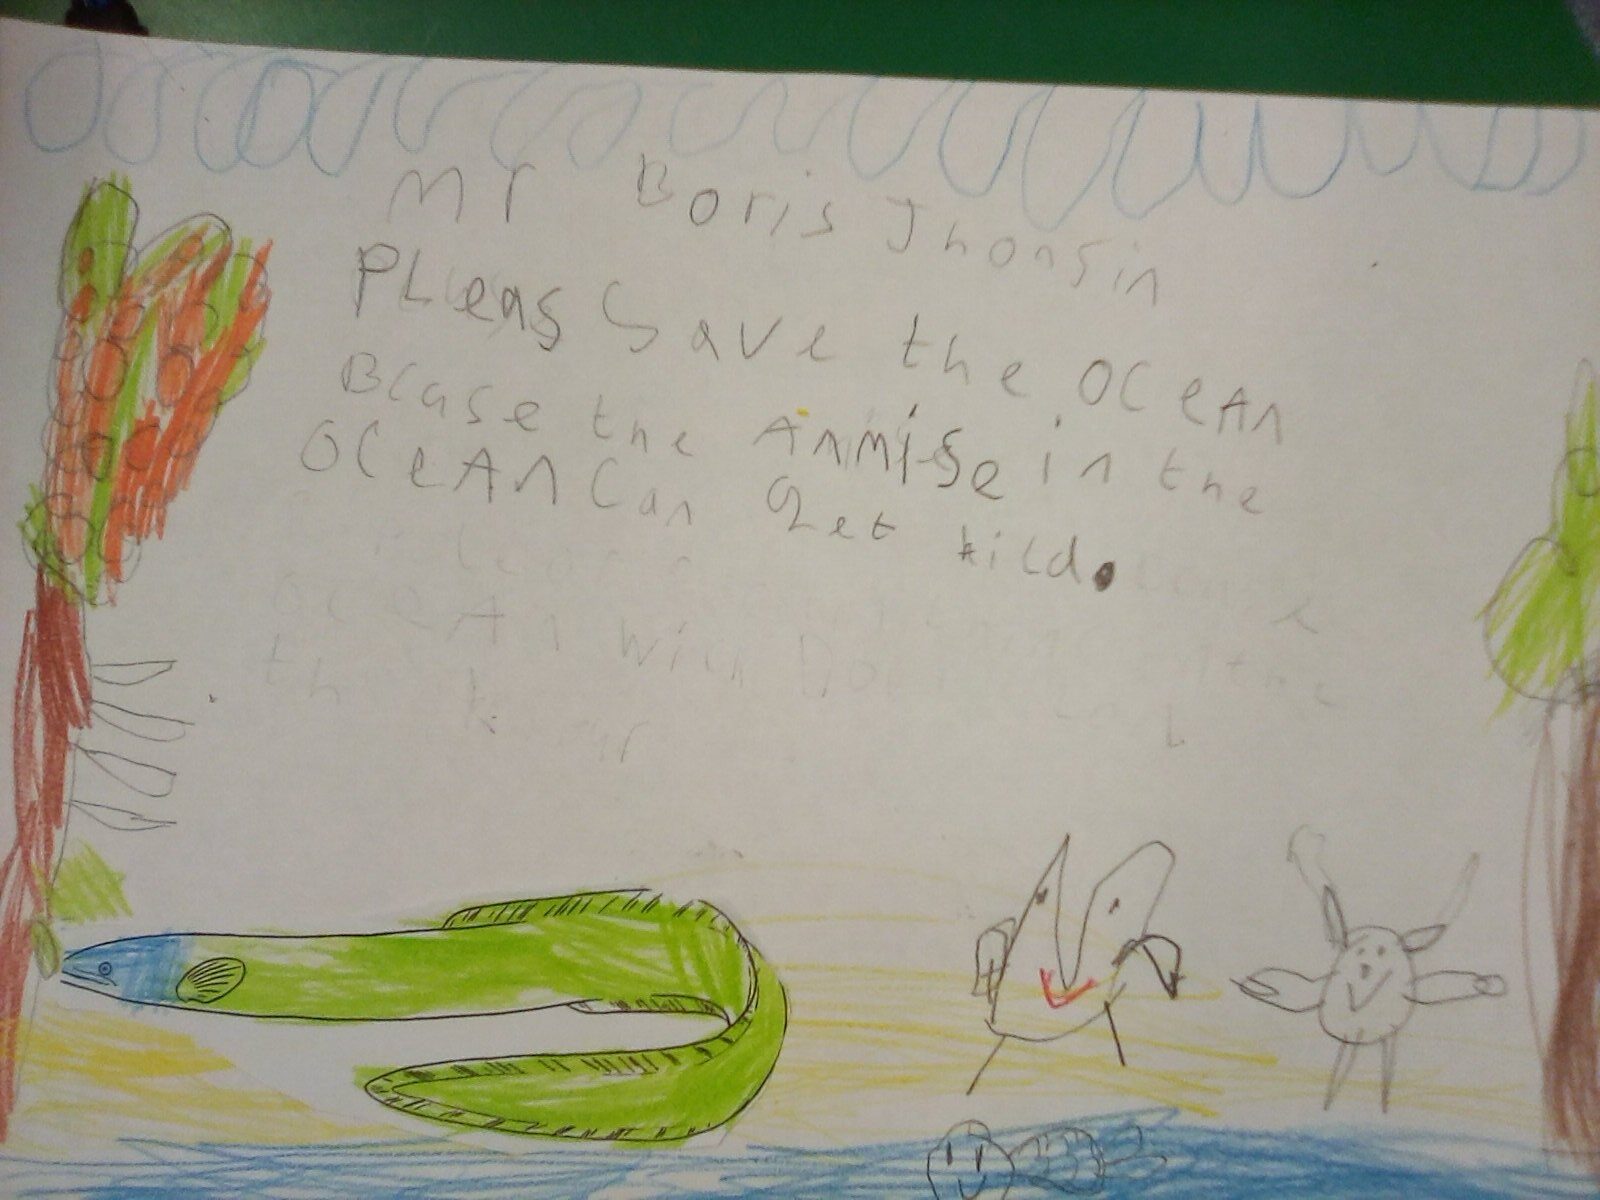 Poster drawn by a school pupil calling for better ocean protection. Features colourful sea creatures and a message to Prime Minister Boris Johnson